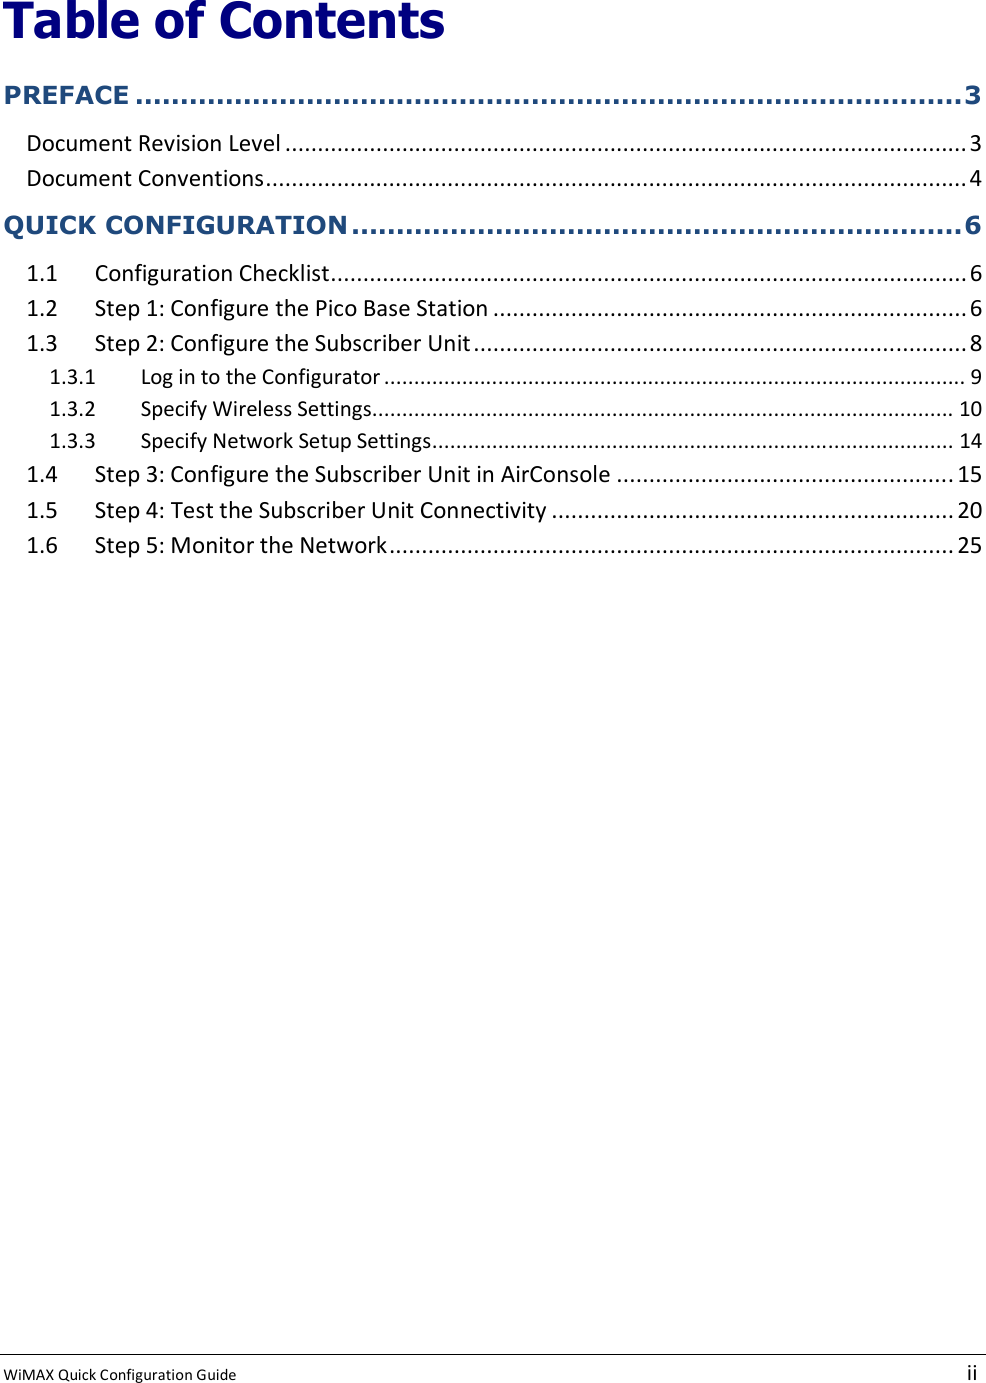  WiMAX Quick Configuration Guide   ii    Table of Contents PREFACE ............................................................................................3 Document Revision Level ......................................................................................................... 3 Document Conventions............................................................................................................4 QUICK CONFIGURATION....................................................................6 1.1 Configuration Checklist..................................................................................................6 1.2 Step 1: Configure the Pico Base Station .........................................................................6 1.3 Step 2: Configure the Subscriber Unit............................................................................ 8 1.3.1  Log in to the Configurator ................................................................................................. 9 1.3.2  Specify Wireless Settings................................................................................................. 10 1.3.3  Specify Network Setup Settings....................................................................................... 14 1.4 Step 3: Configure the Subscriber Unit in AirConsole .................................................... 15 1.5 Step 4: Test the Subscriber Unit Connectivity .............................................................. 20 1.6 Step 5: Monitor the Network....................................................................................... 25 